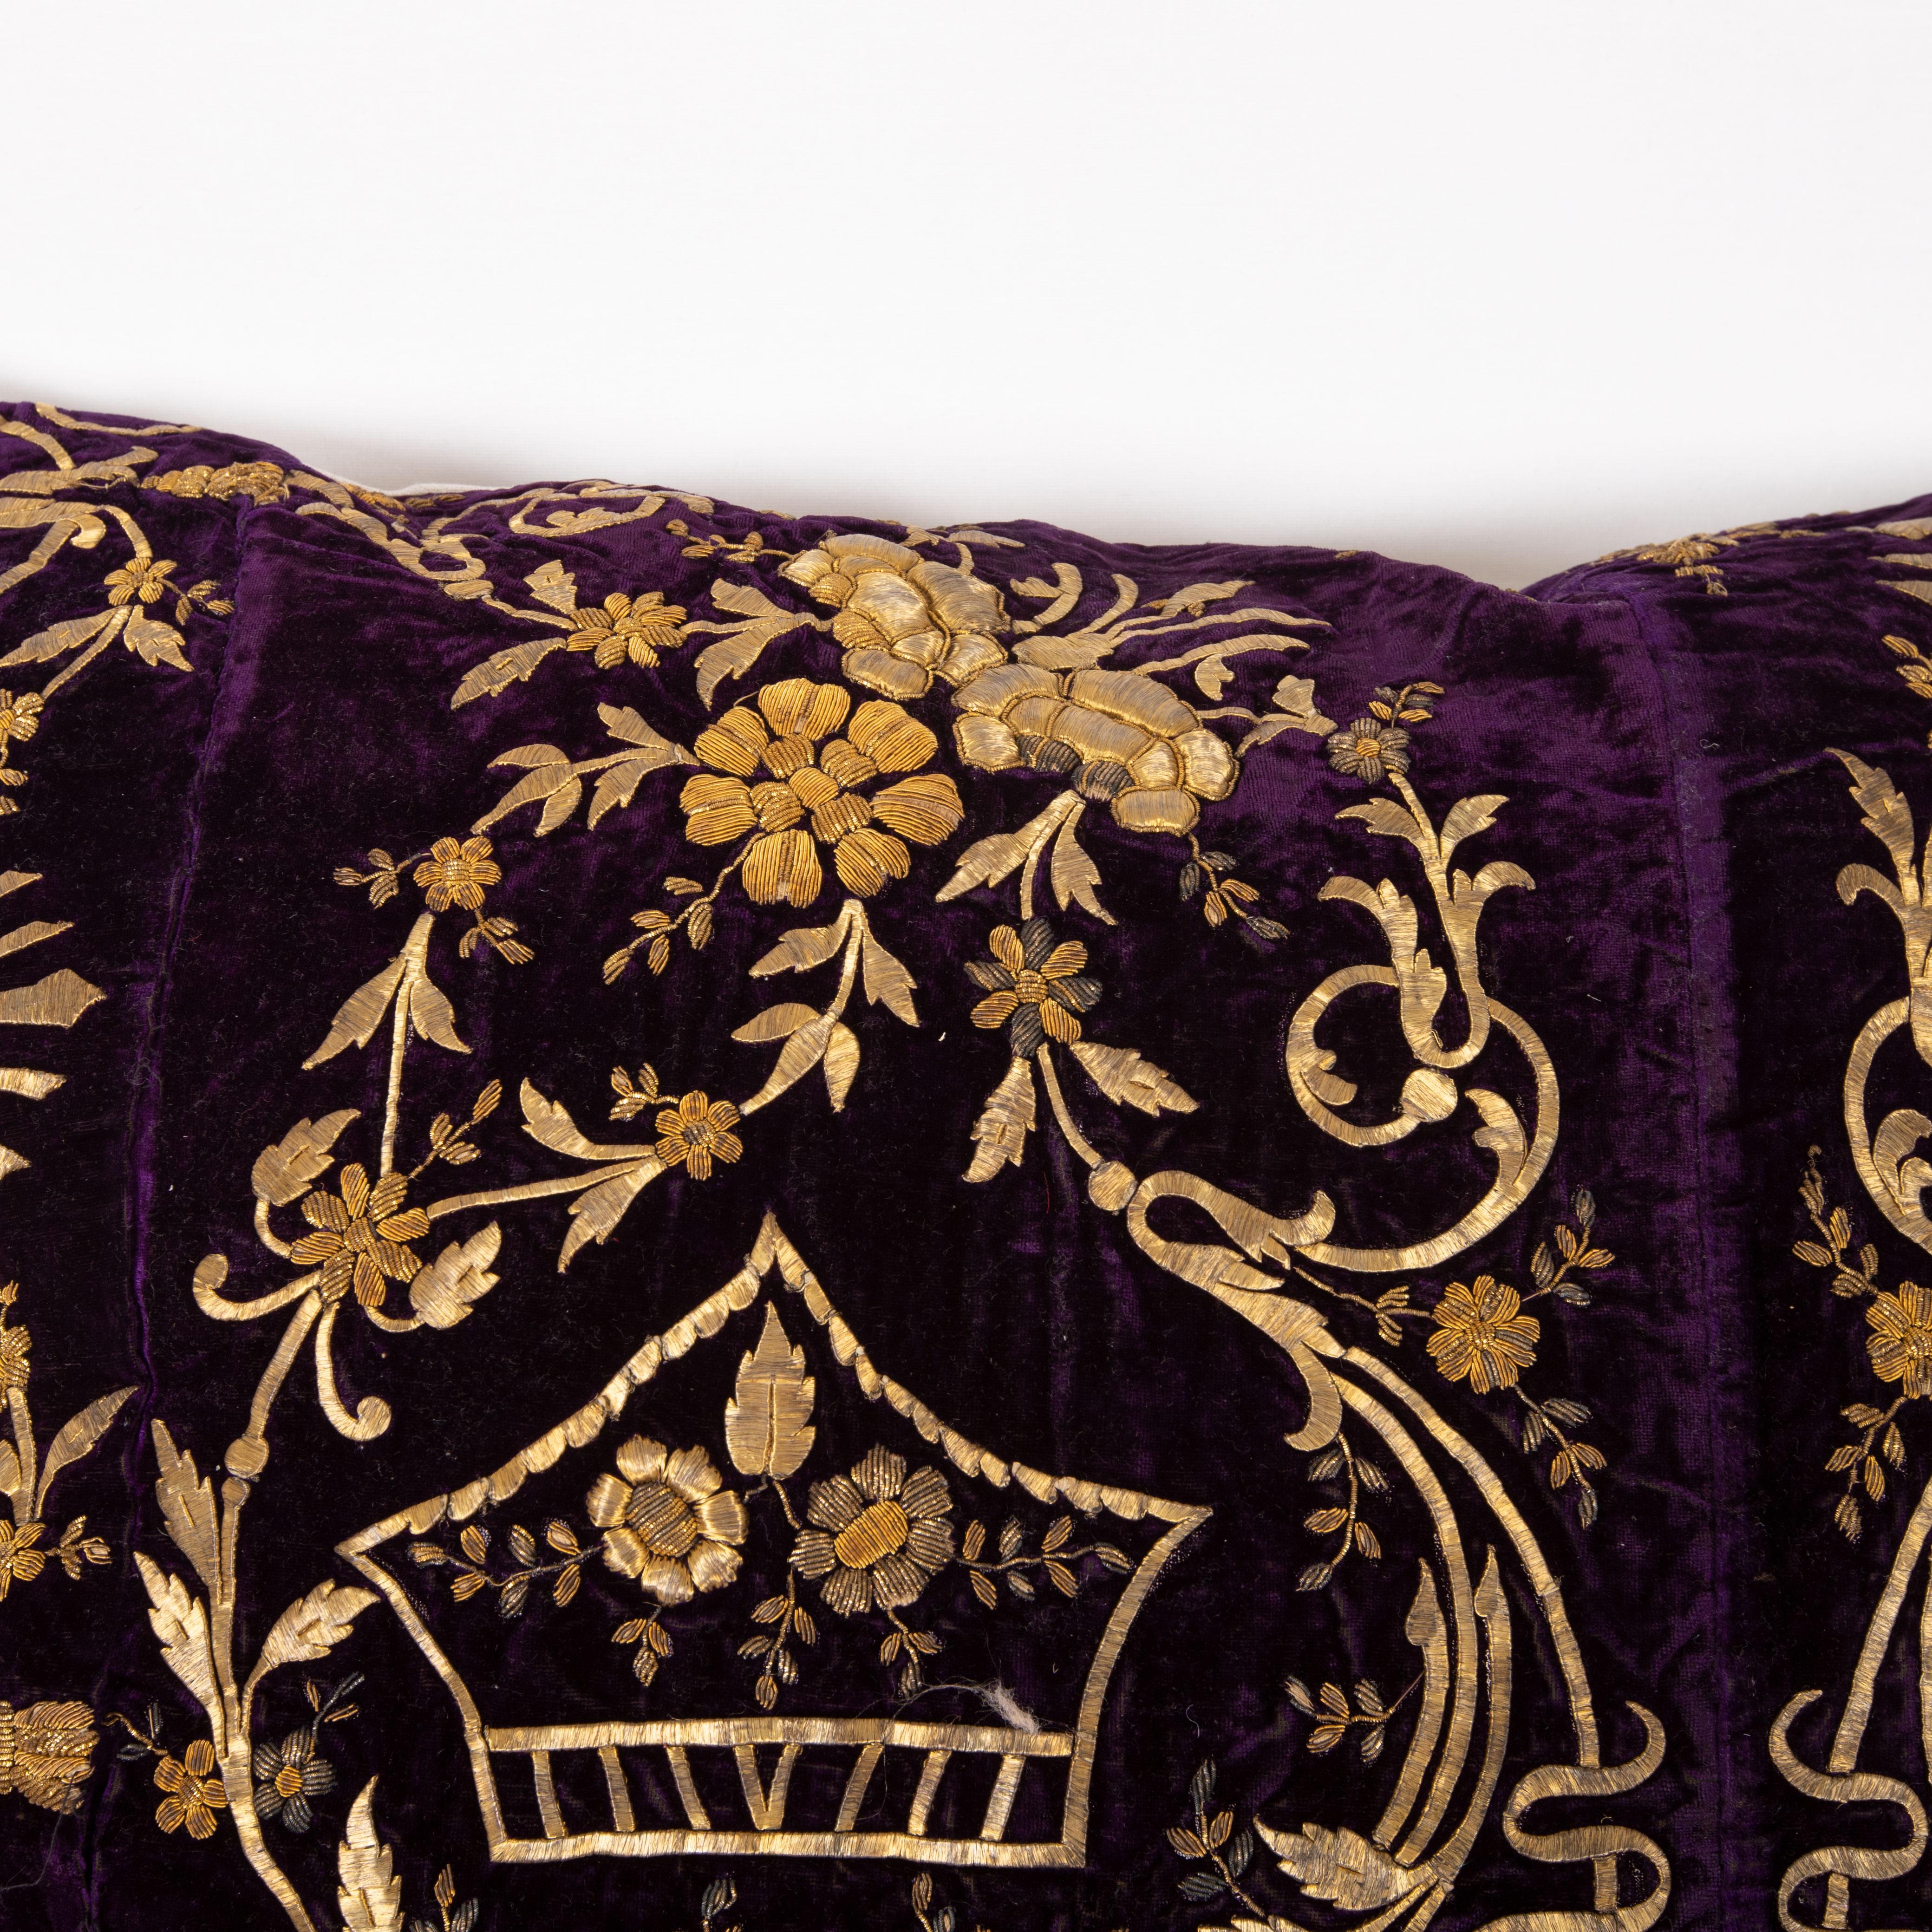 Islamic Antique Pillow Cover Made from a Silk Velvet Sarma Embroidery Fragment., L 19th 